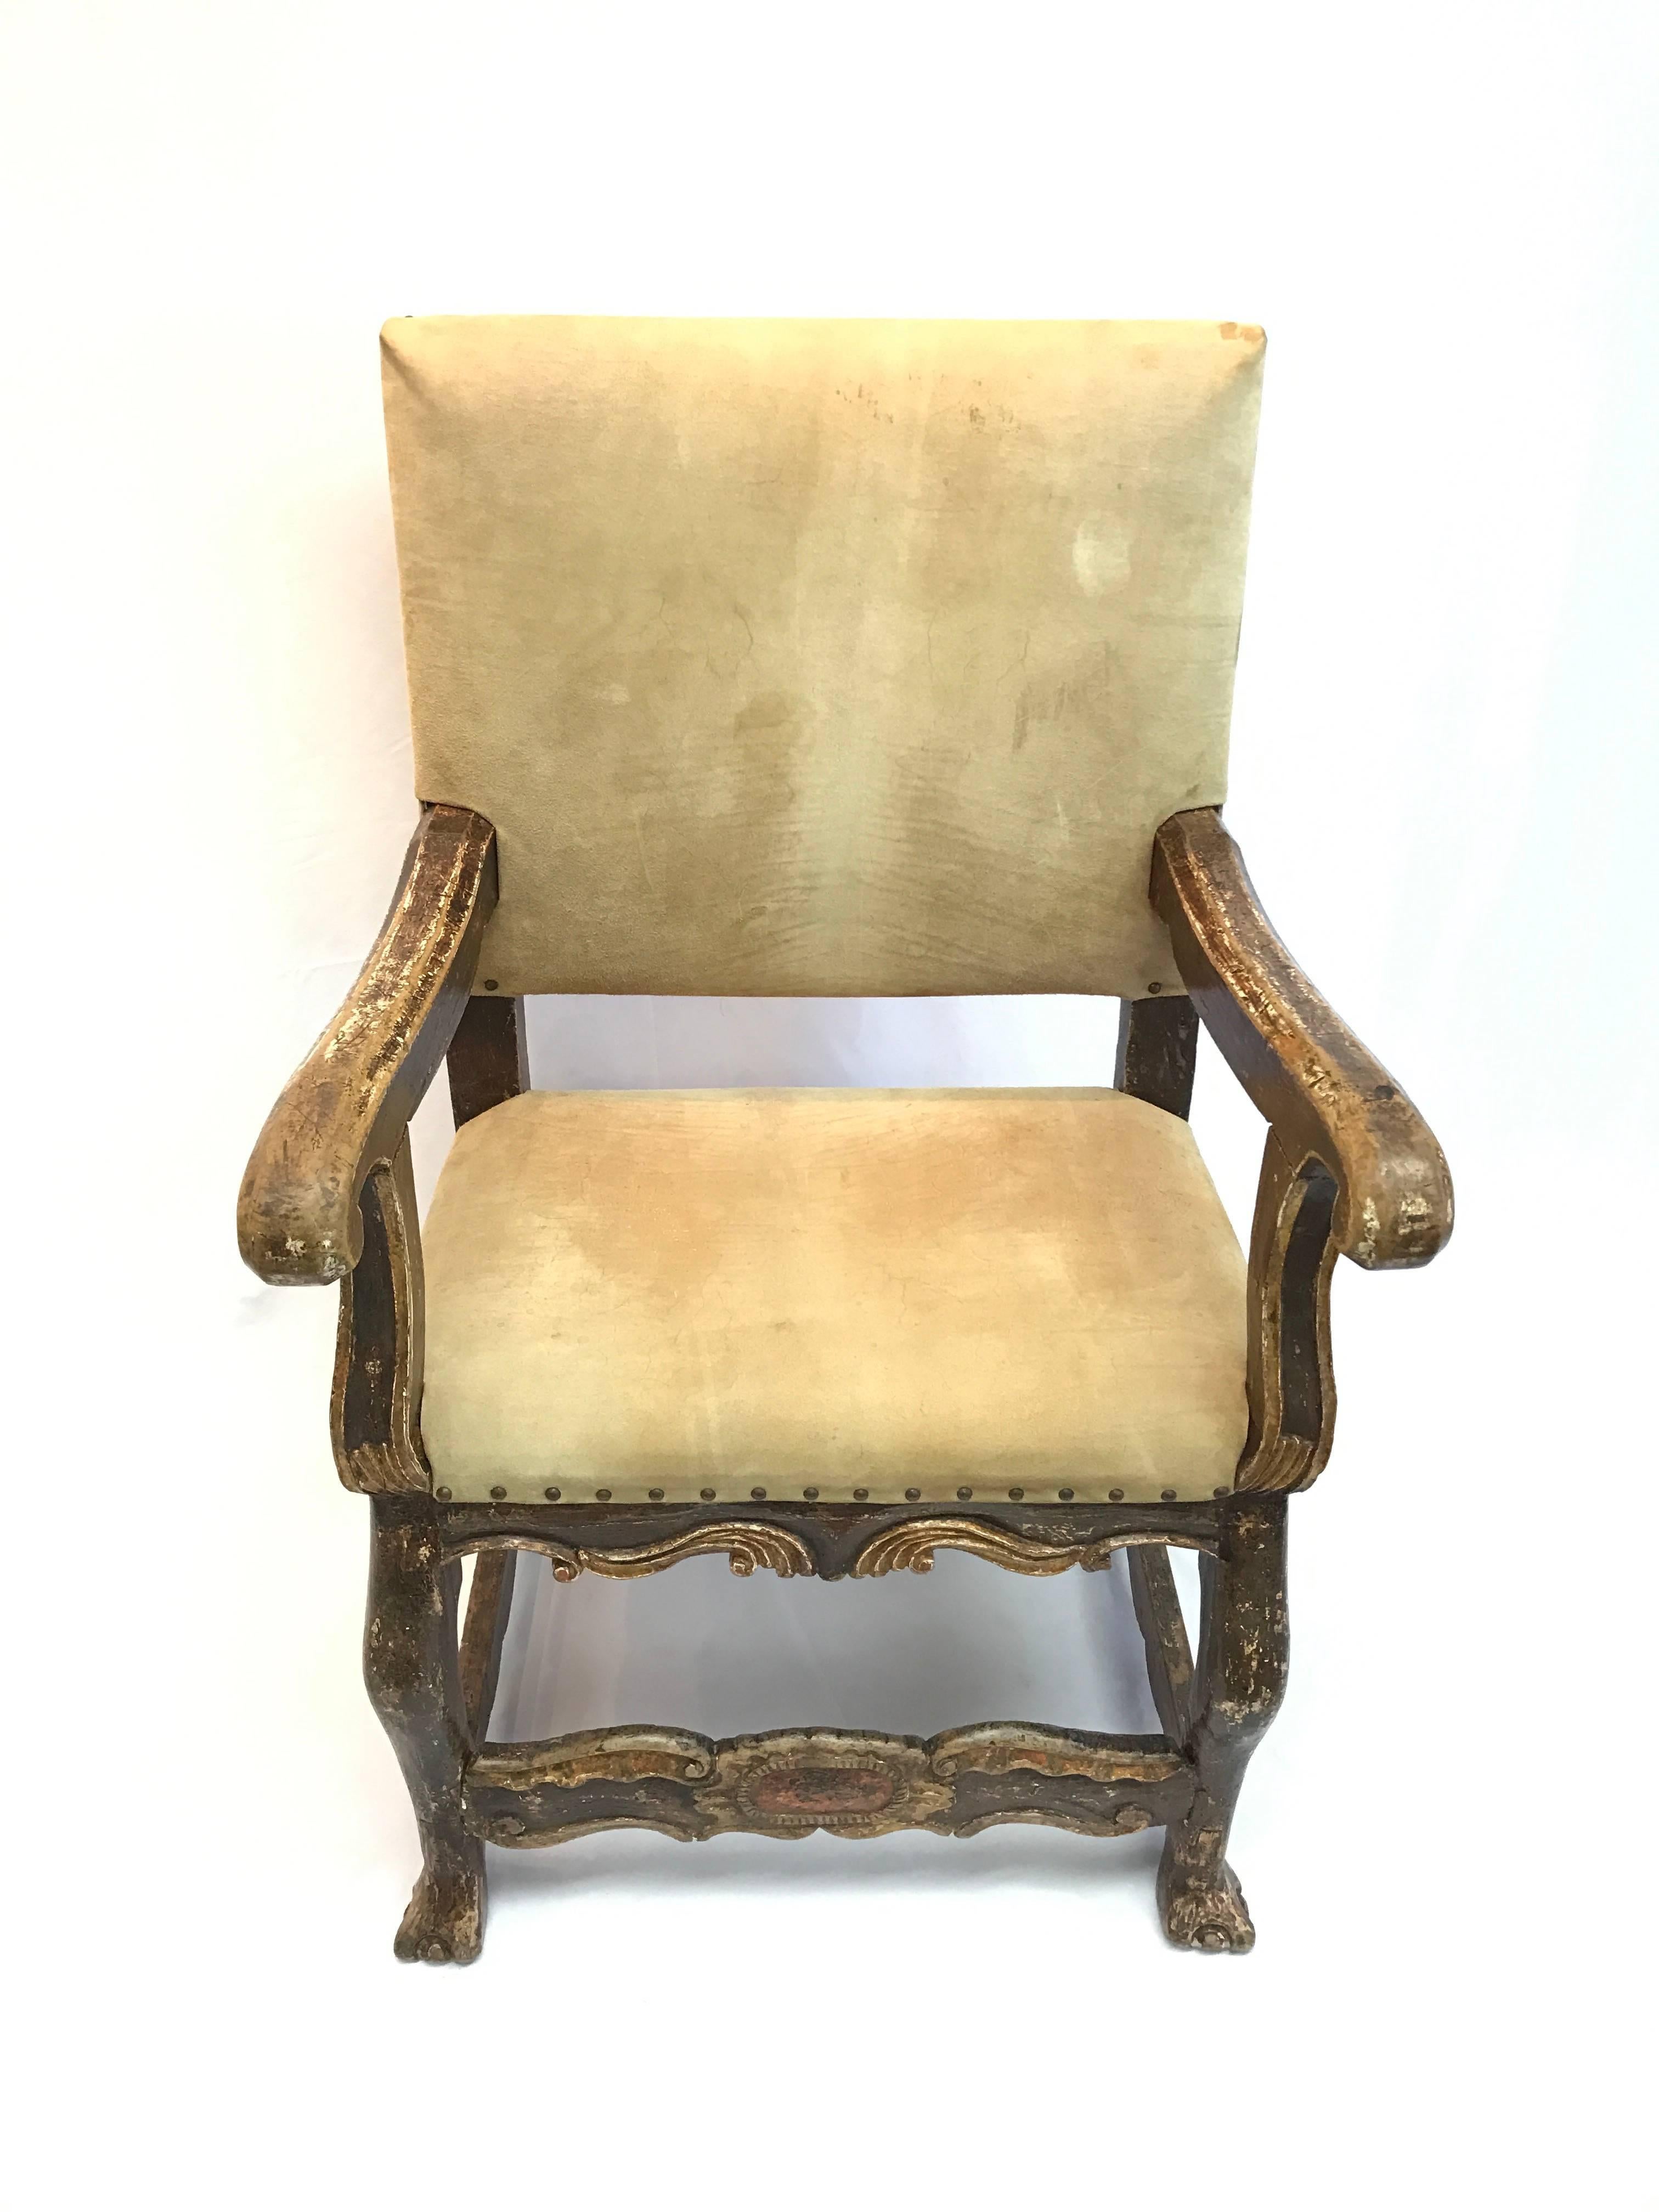 18th century Peruvian gold polychrome chair with suede upholstery and nail-head trim.